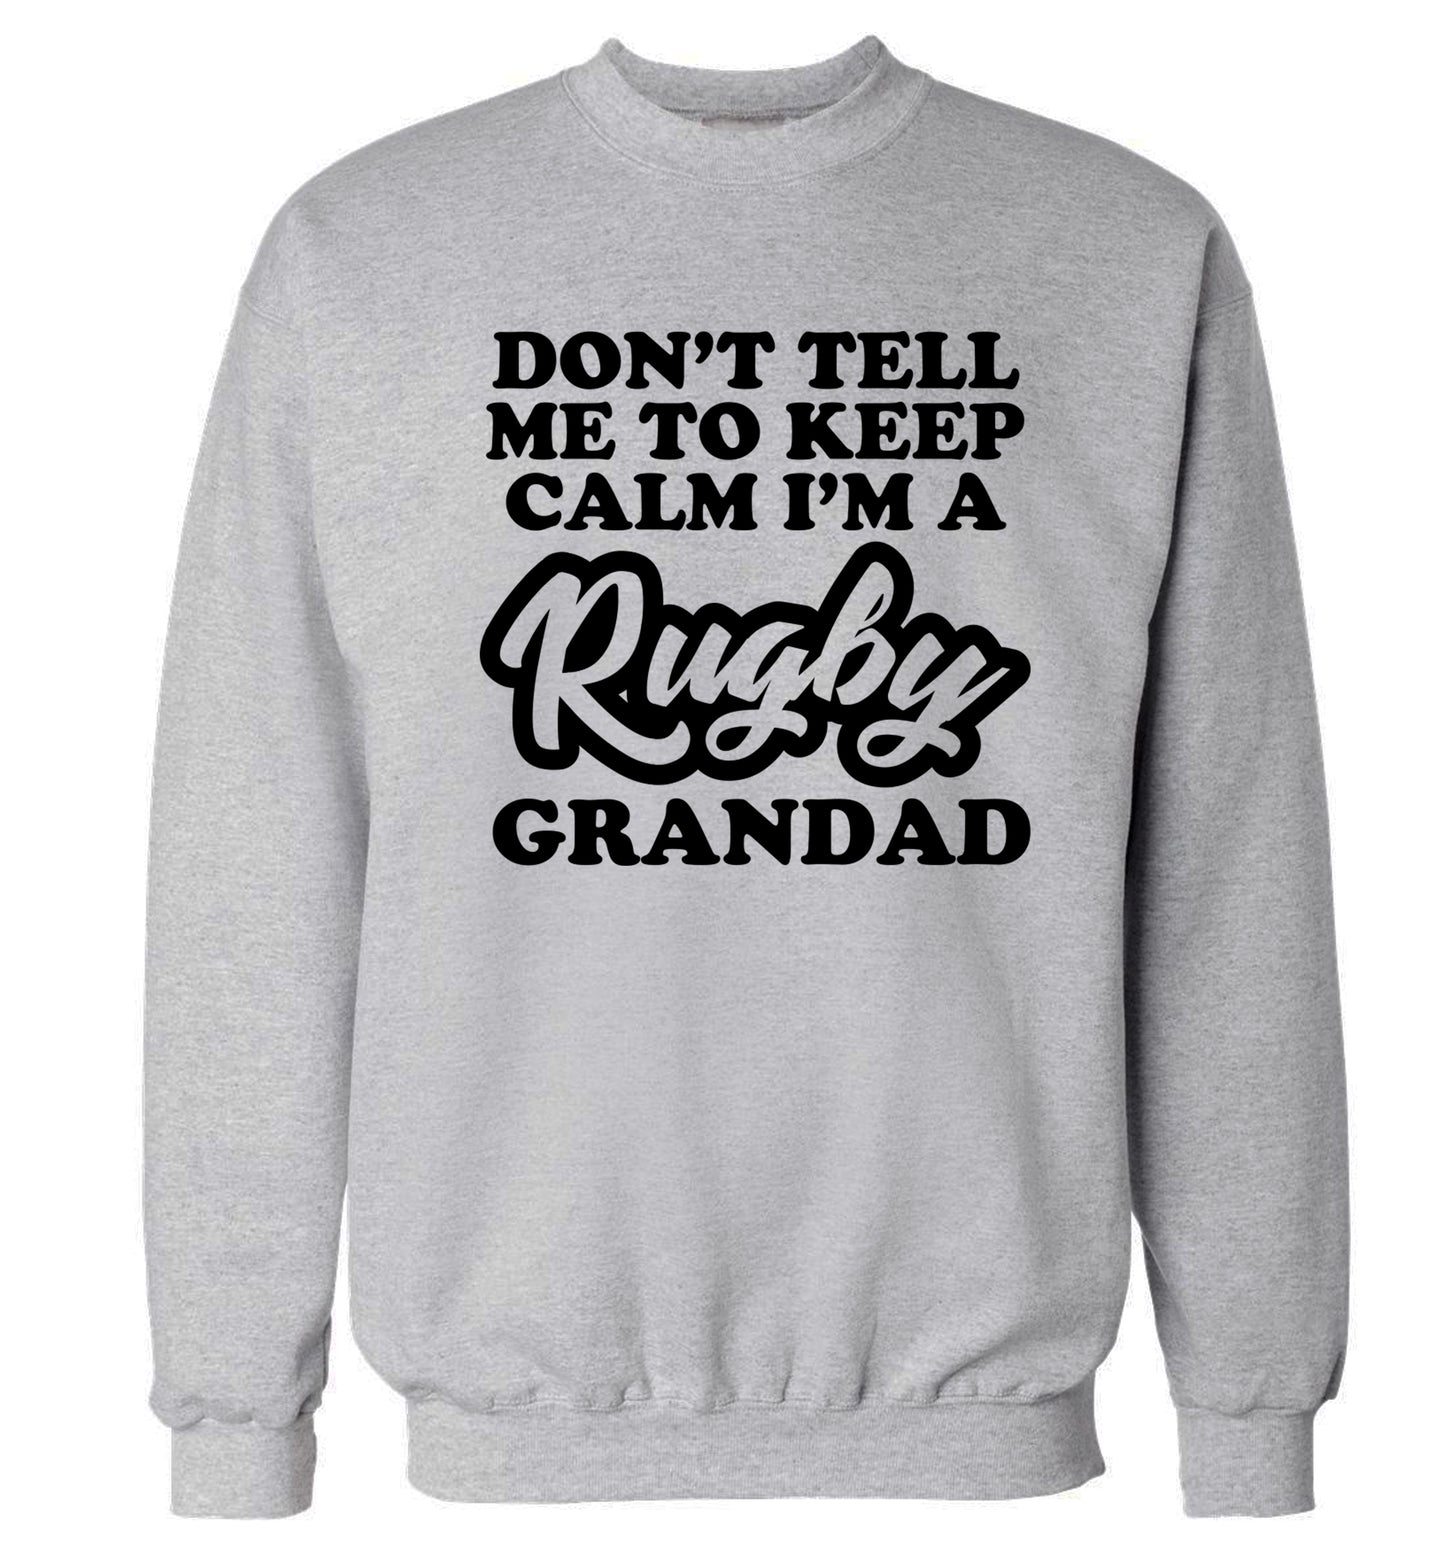 Don't tell me to keep calm I'm a rugby dad Adult's unisex grey Sweater 2XL